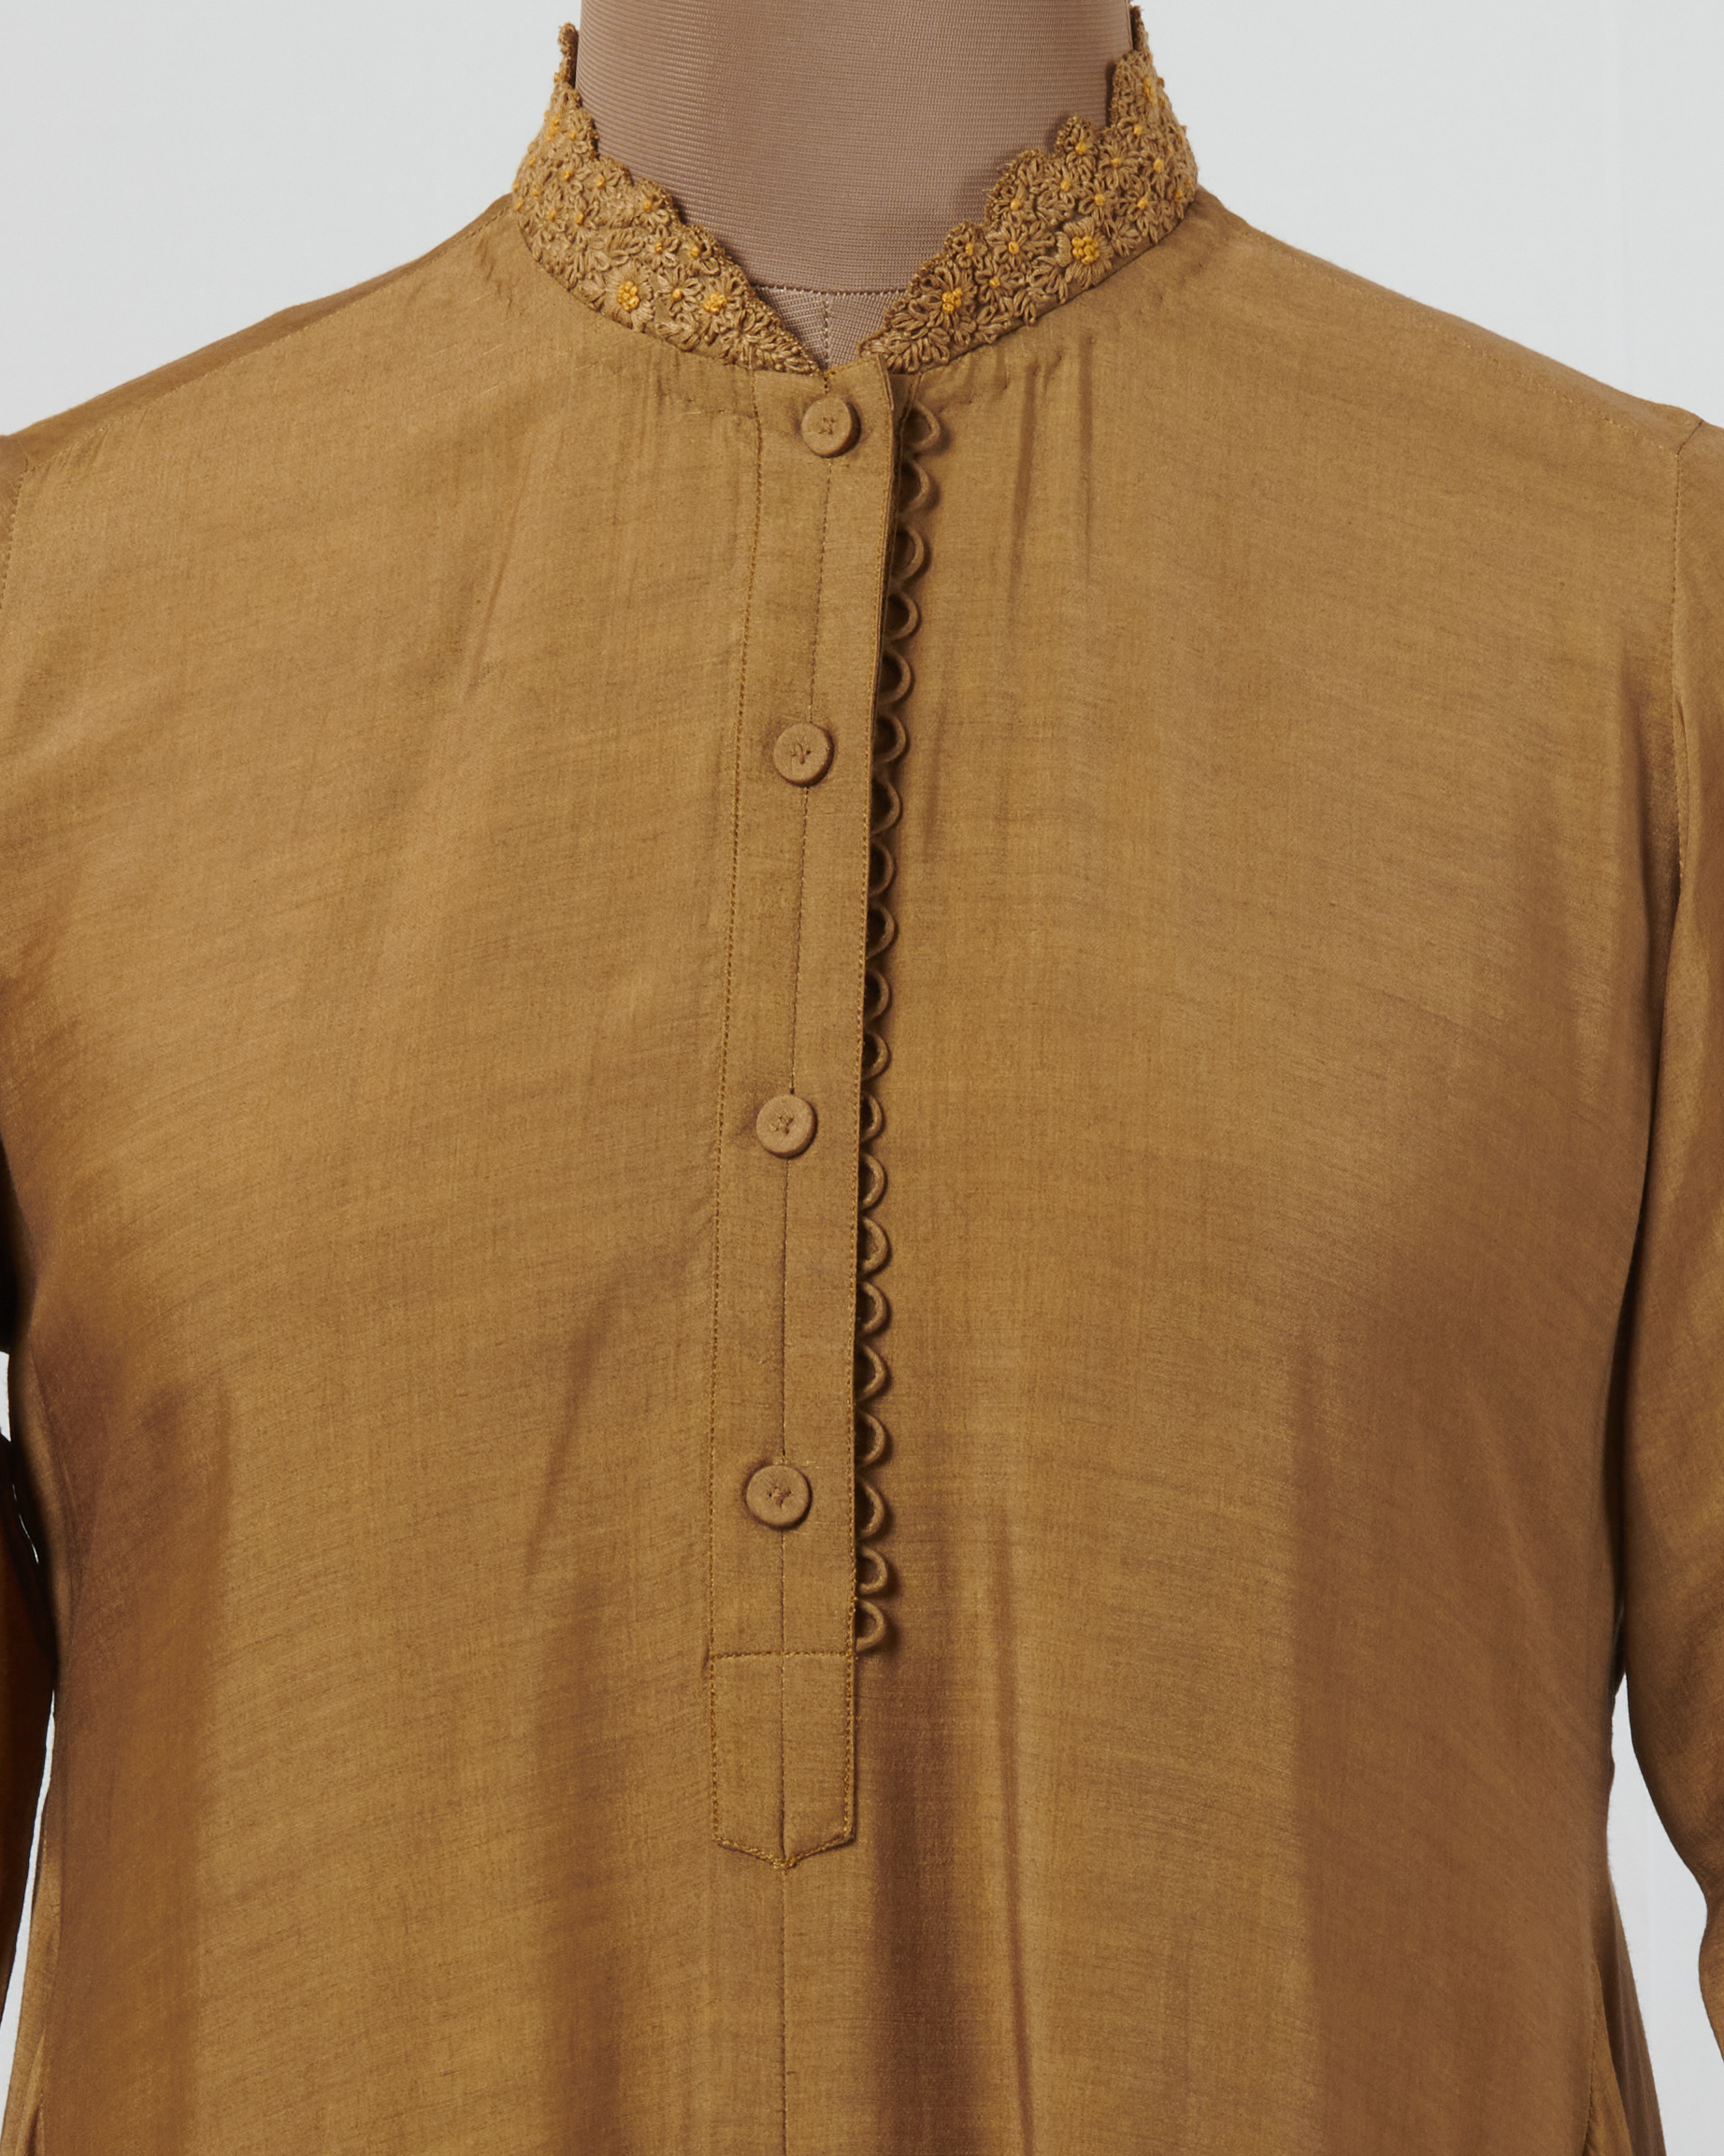 Gold champagne tunic with hand thread embroidered collar and cuff details